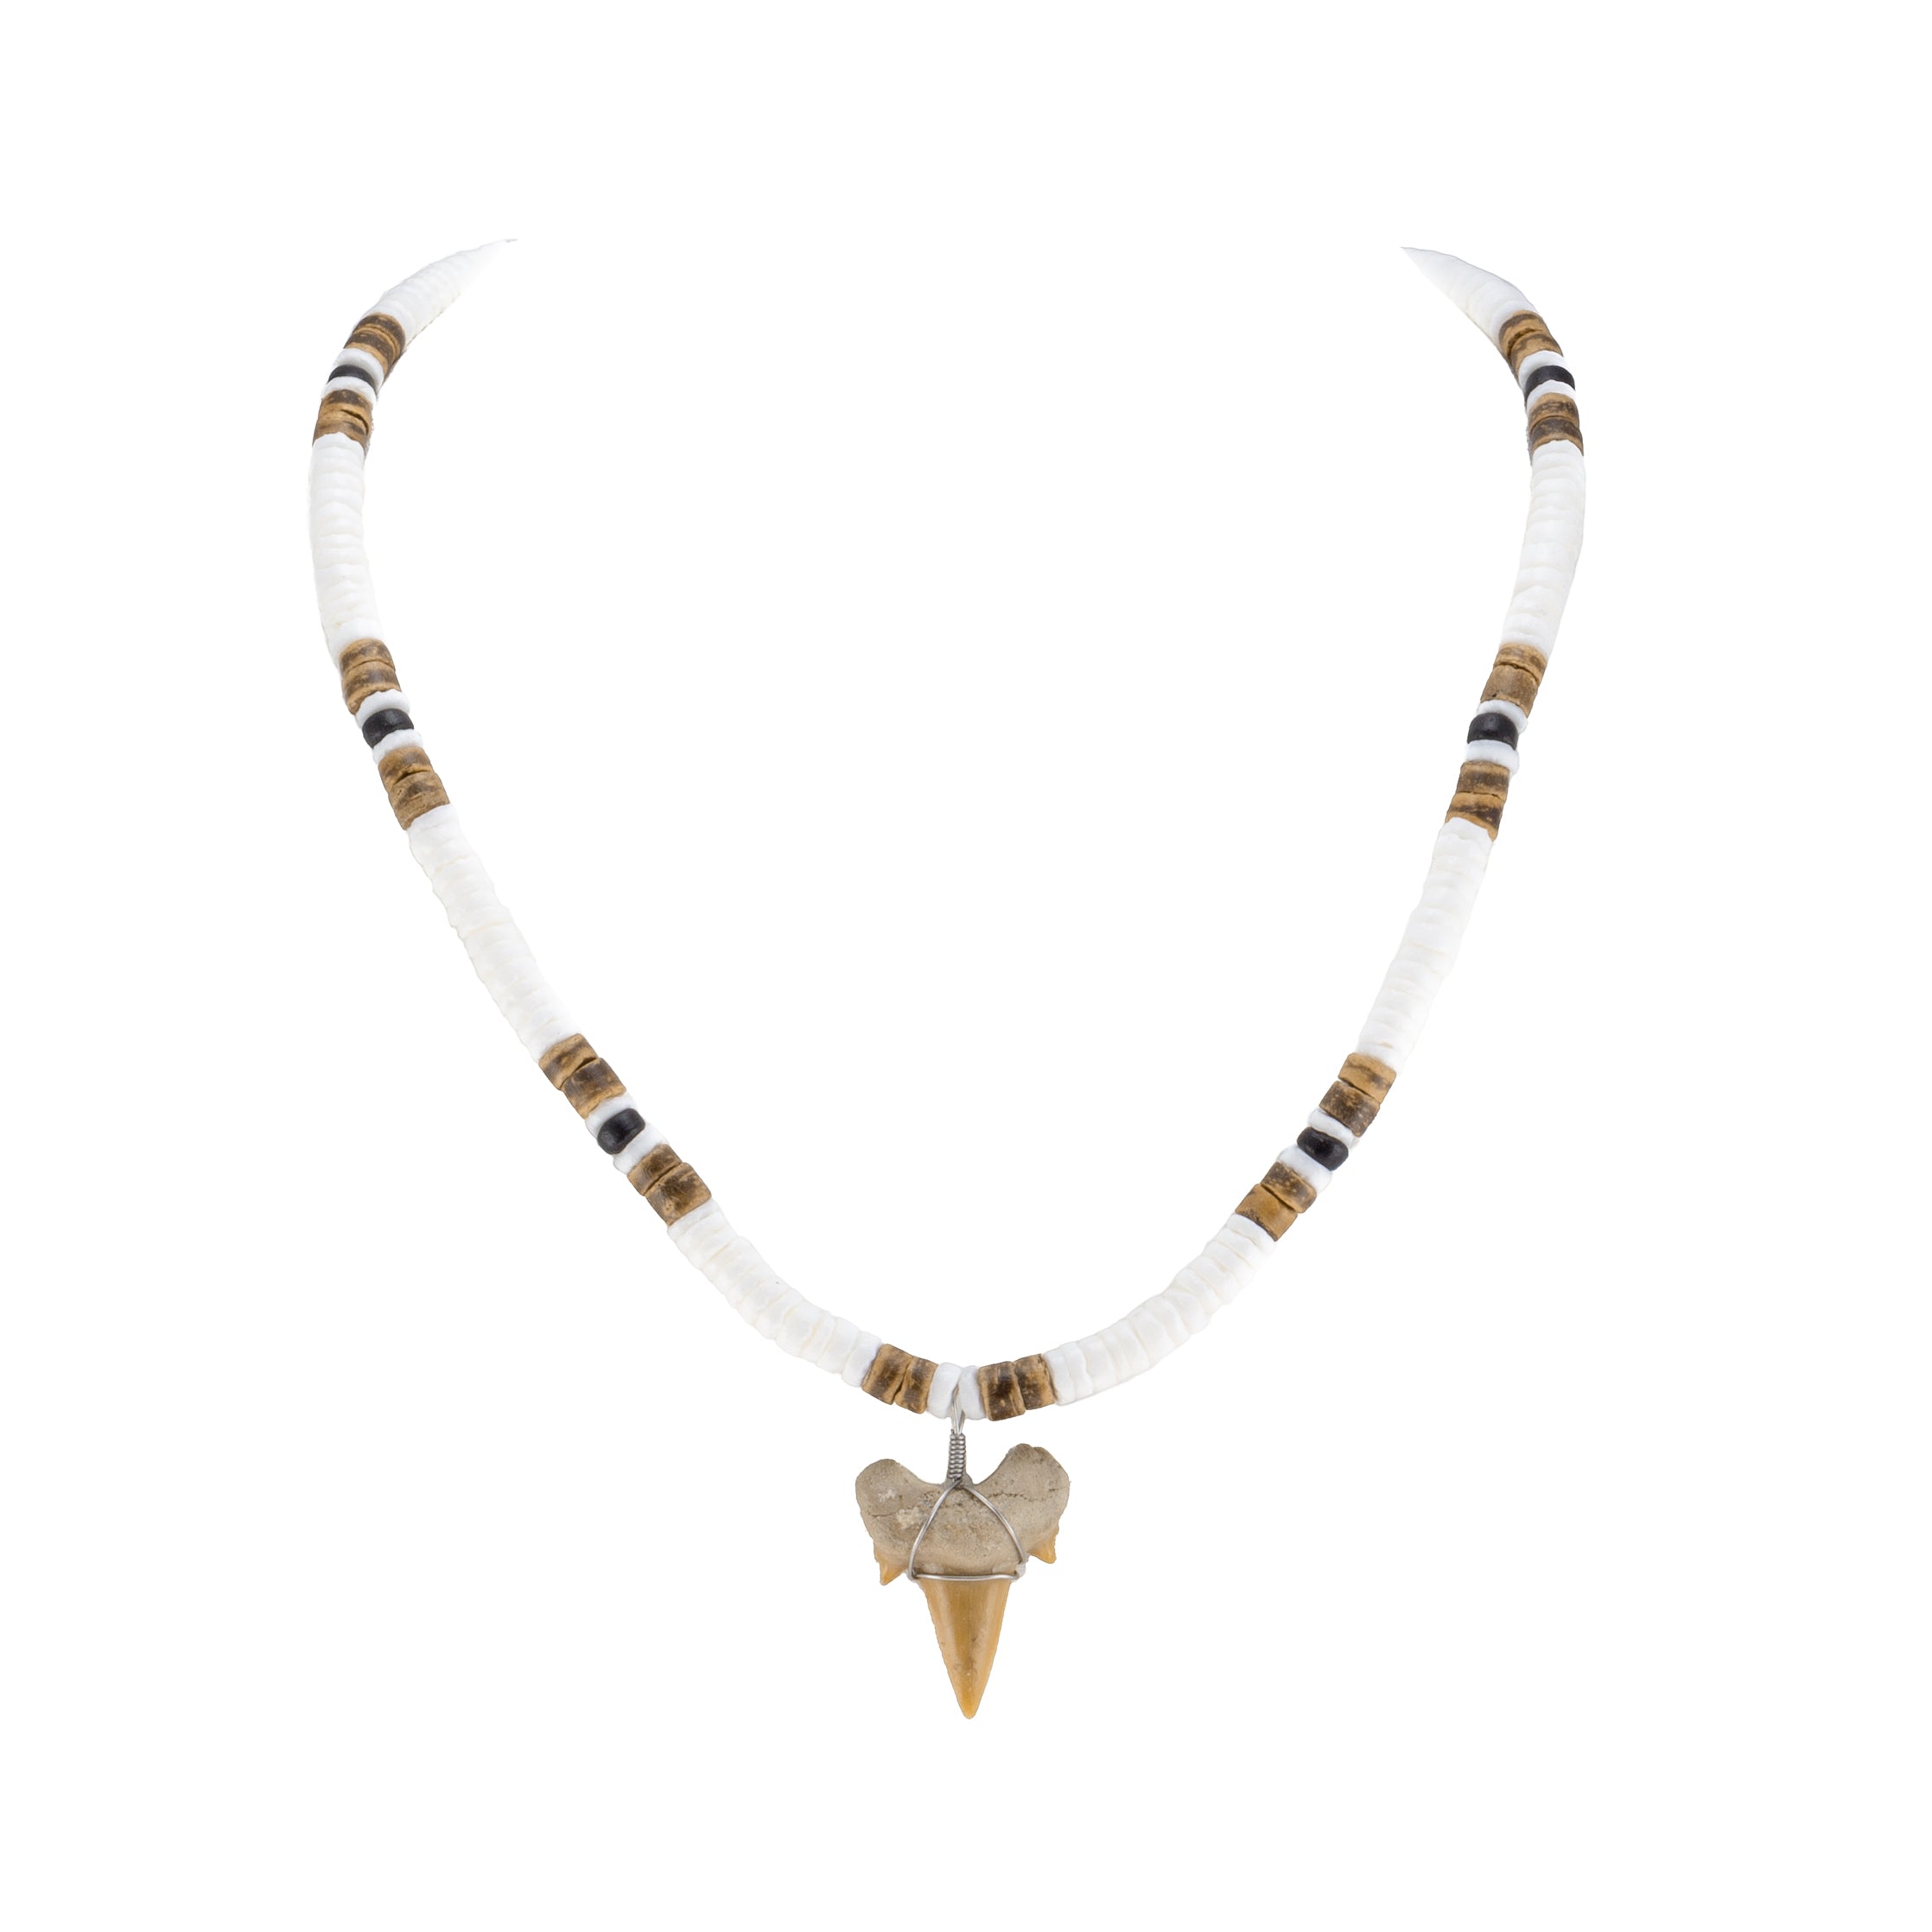 1"+ Shark Tooth Pendant on Puka Shell and Coconut Beads Necklace